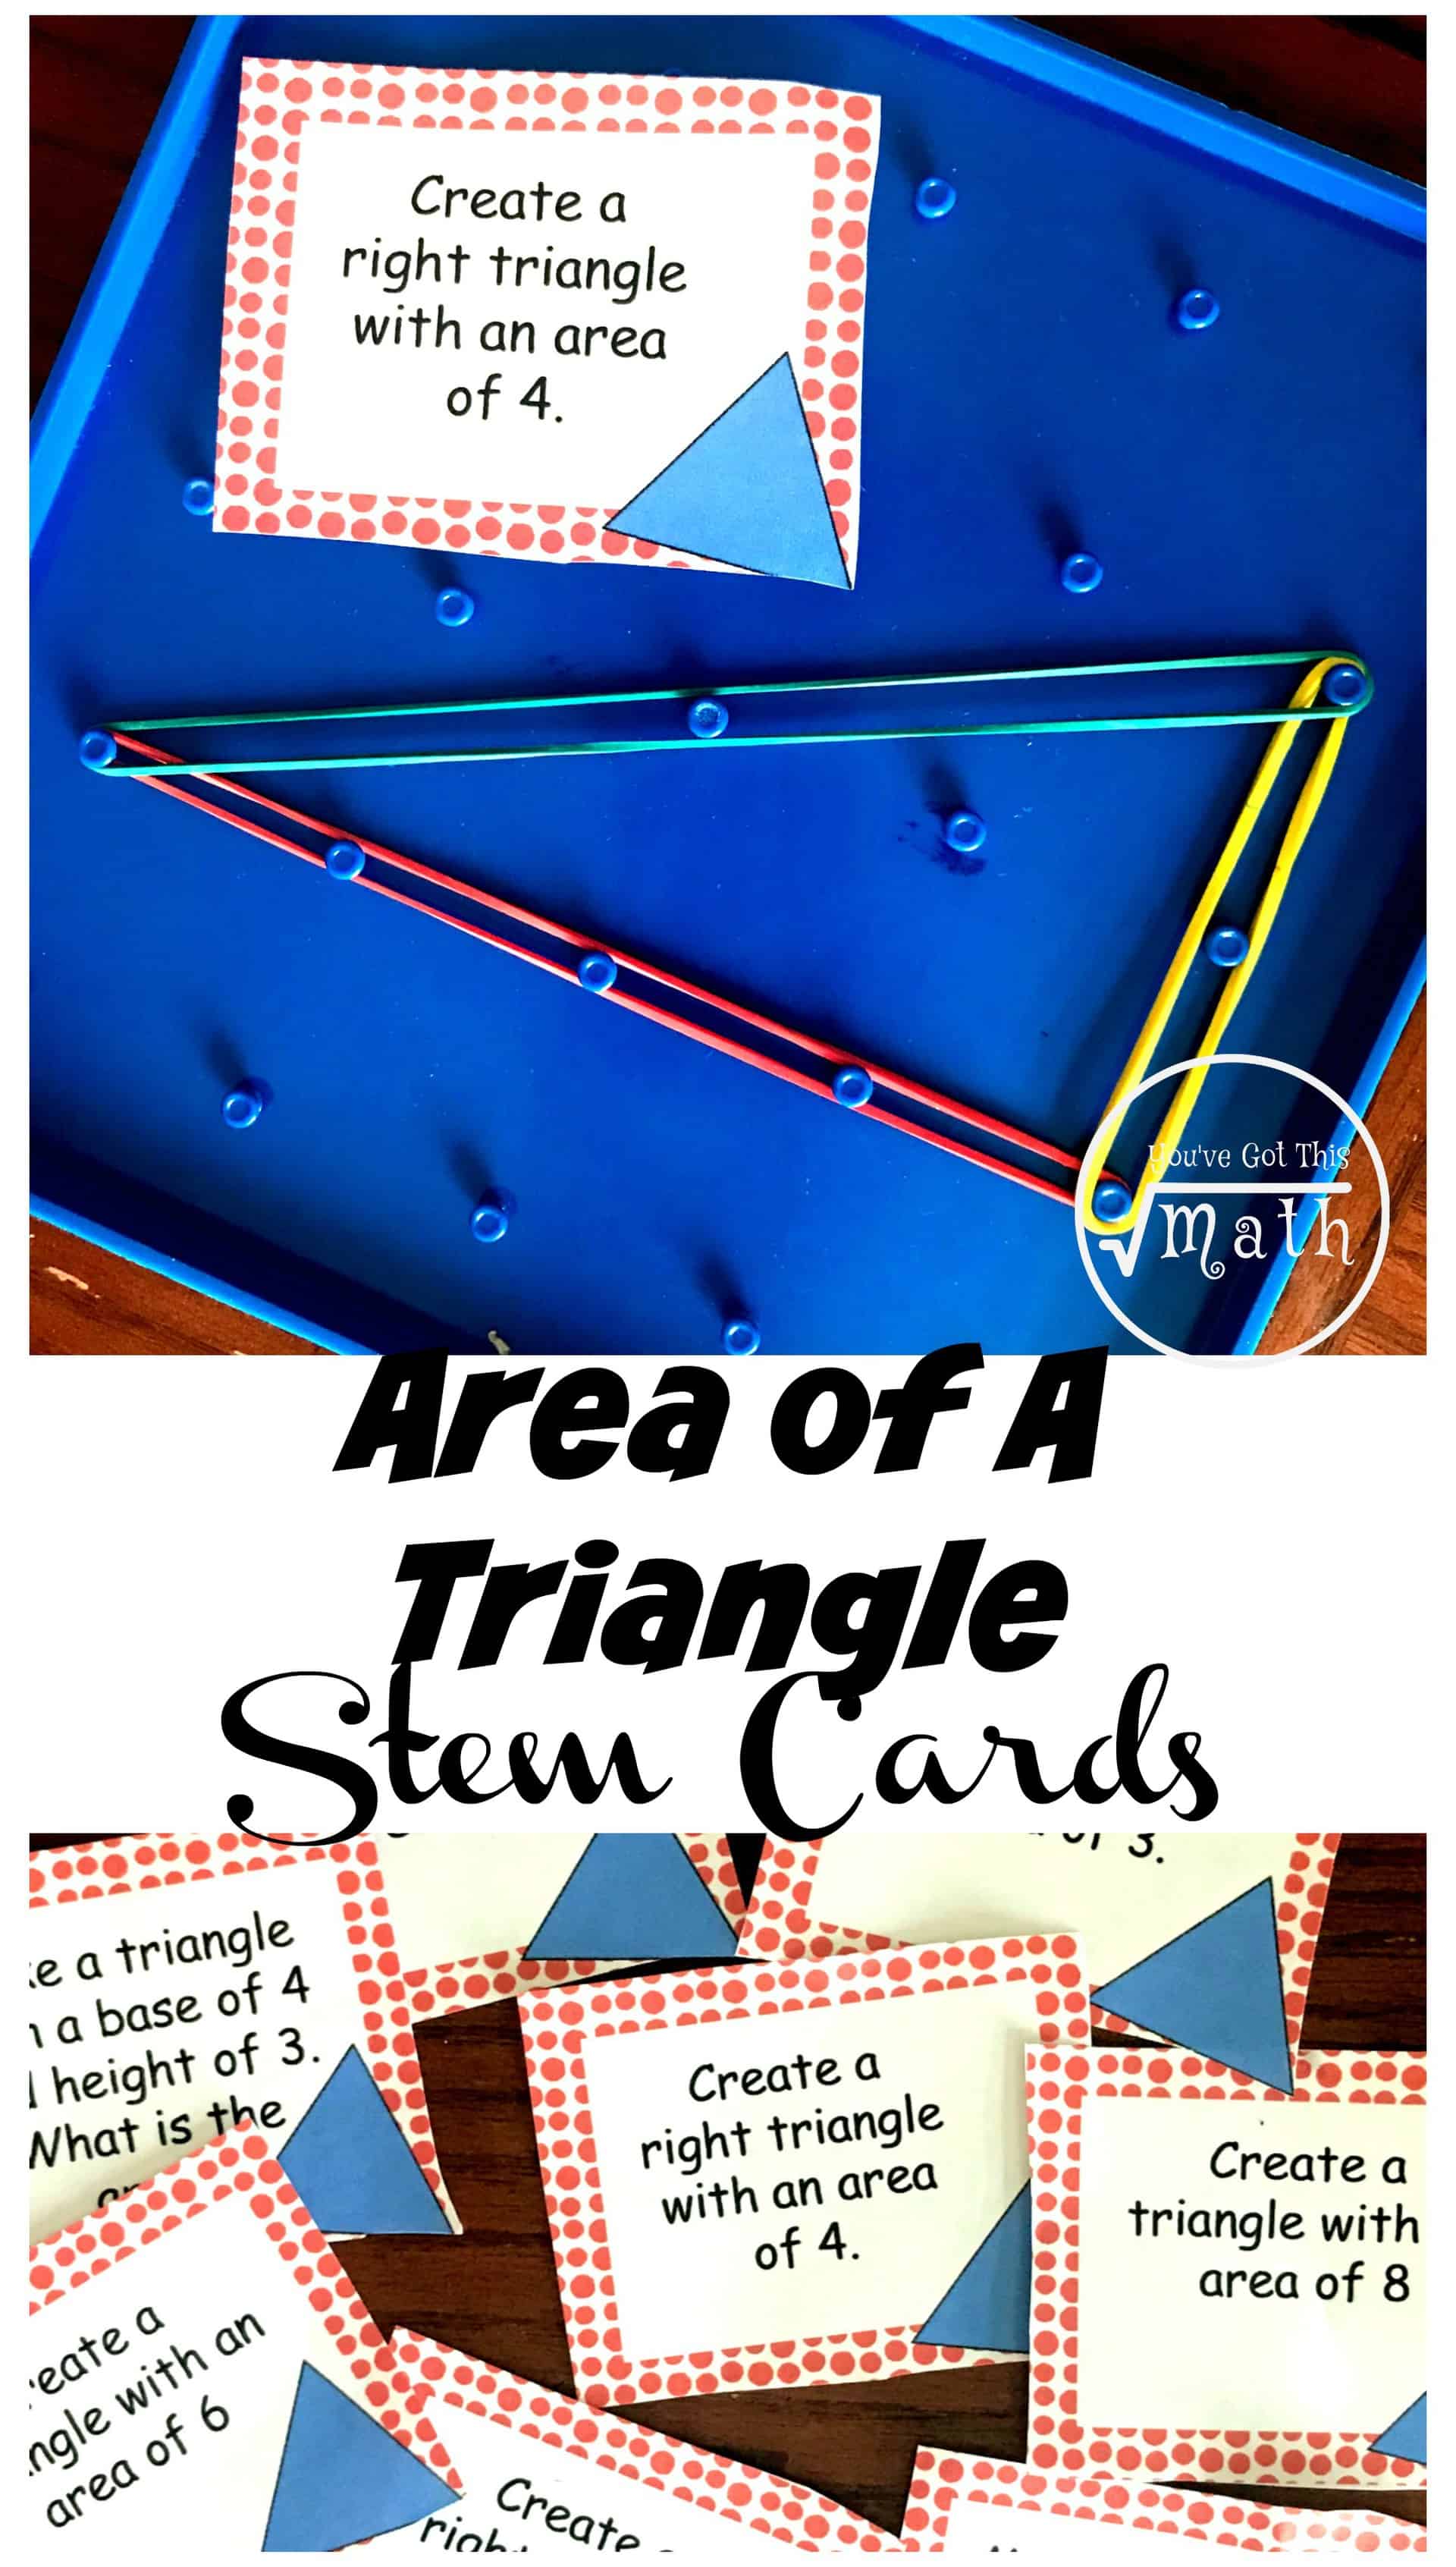 Need some Area of Triangles Practice? These fun STEM cards are a great way for children to practice finding the area of triangles as well as creating triangles with a given area.